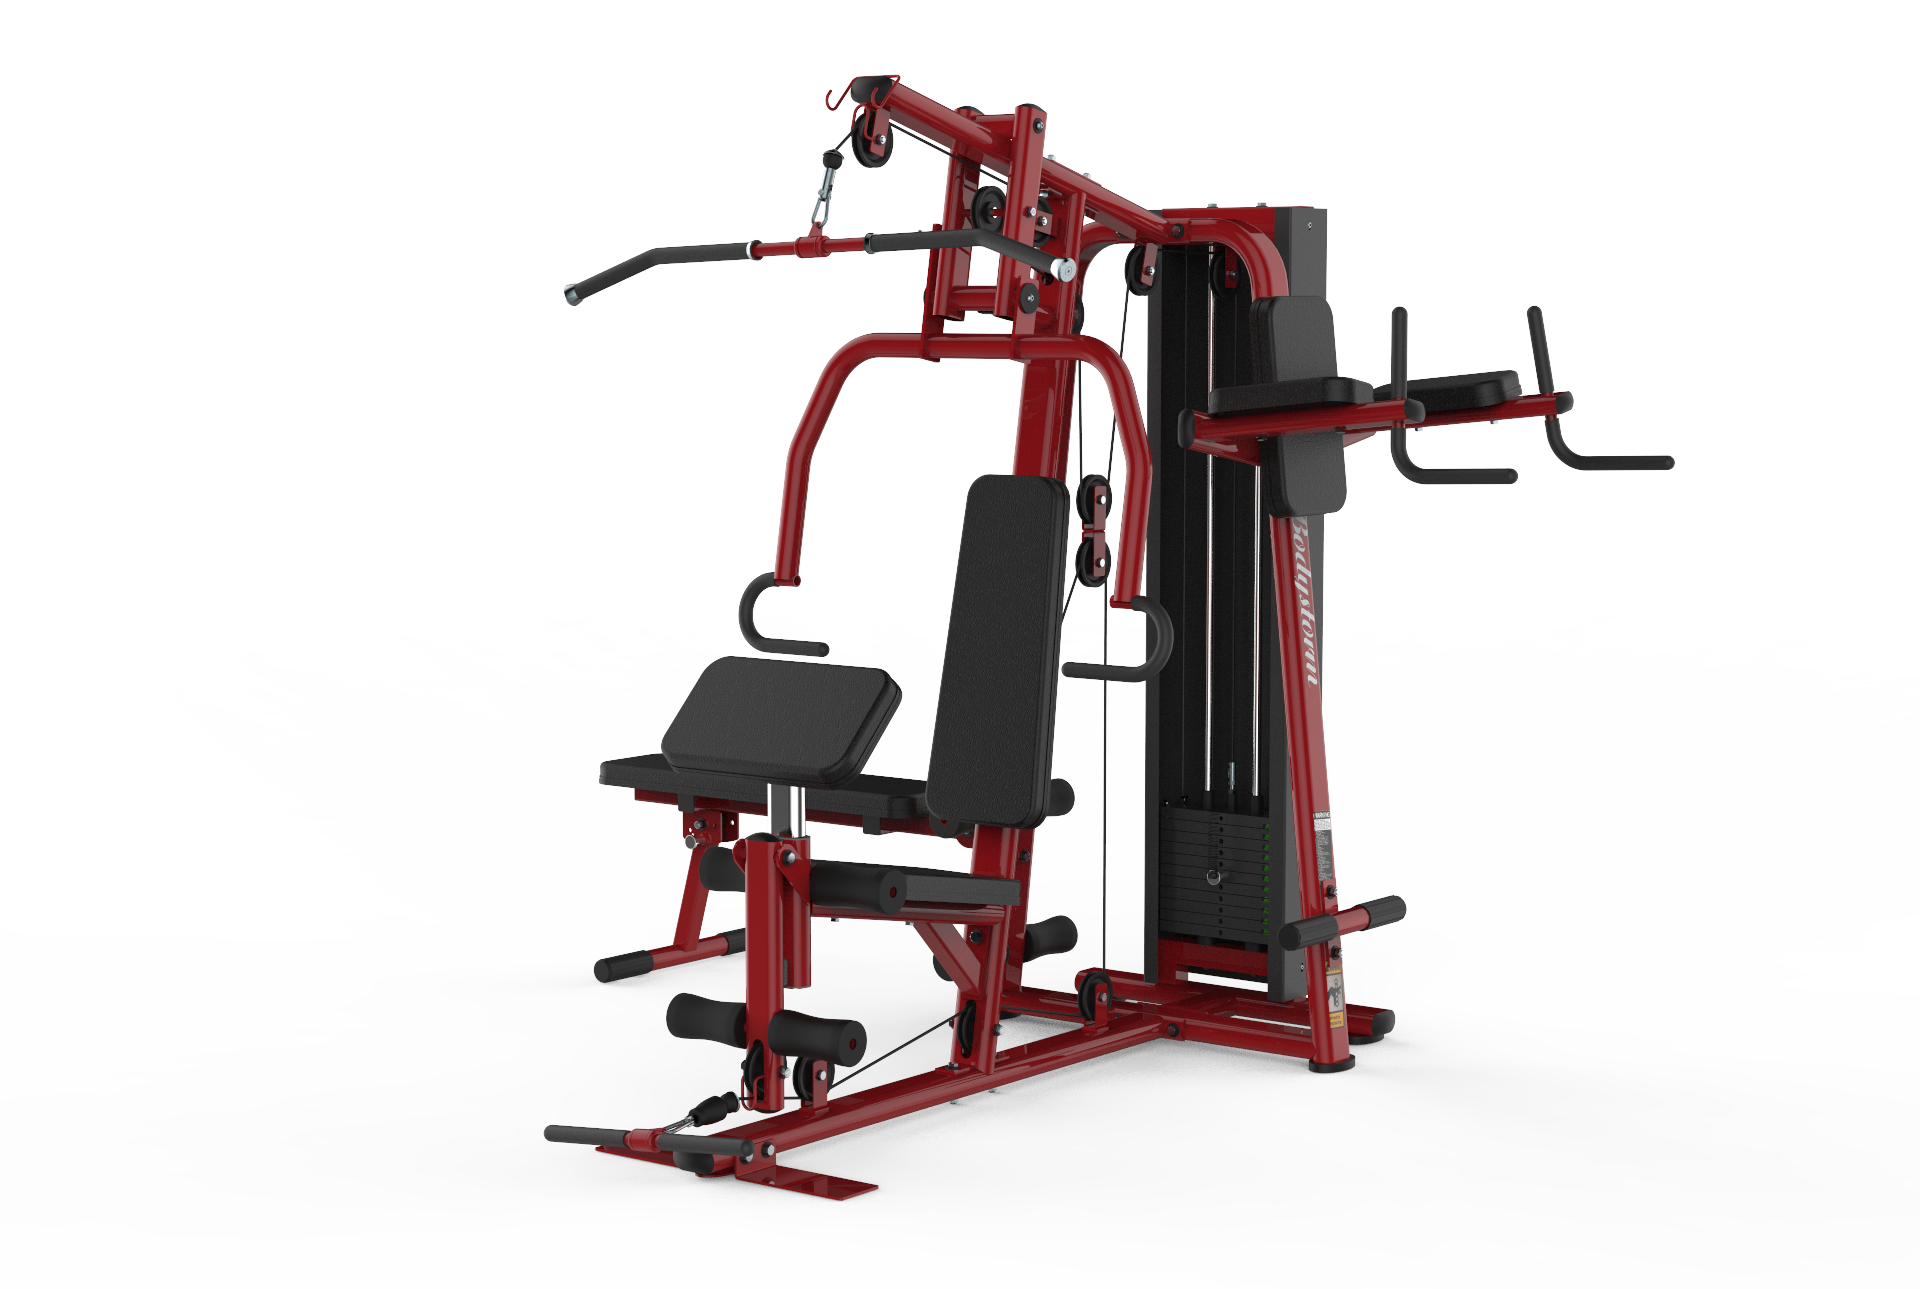 Three station  multi Function Station workout gym fitness equipment